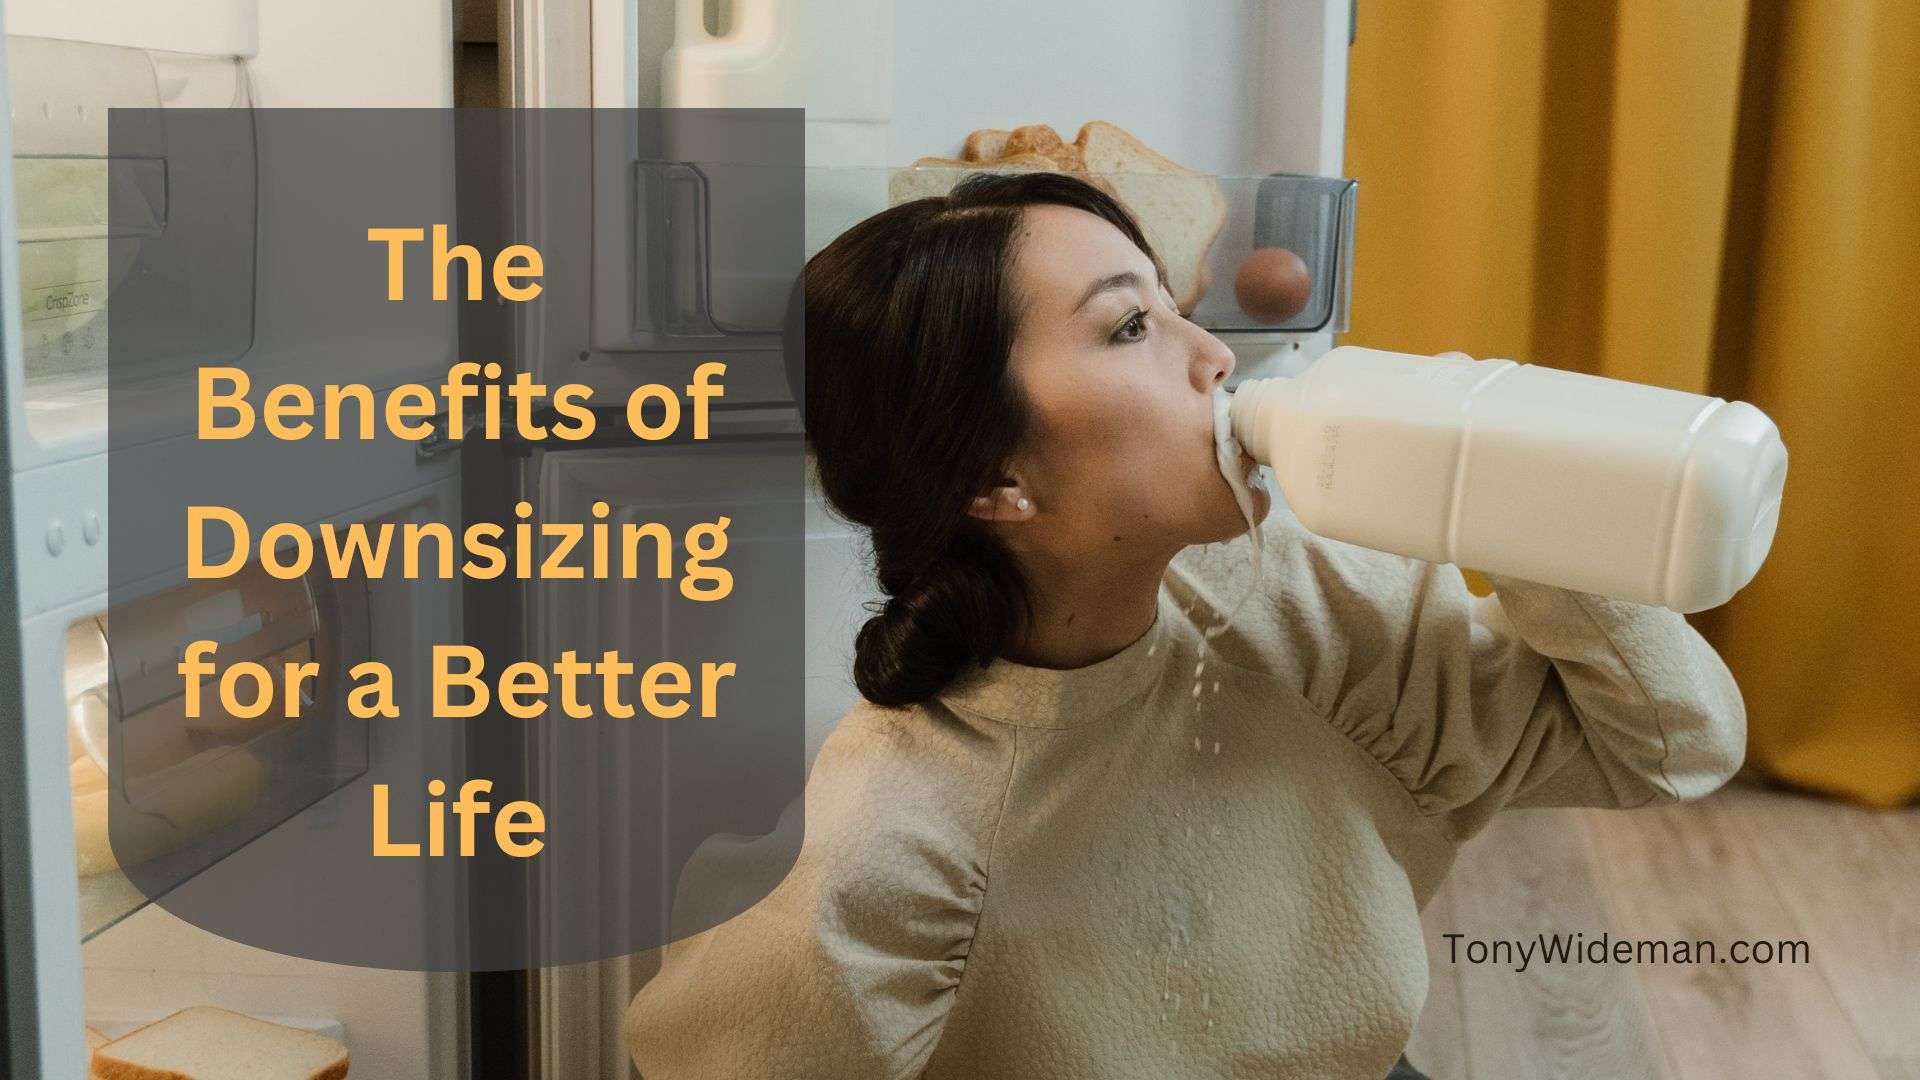 The Benefits of Downsizing for a Better Life